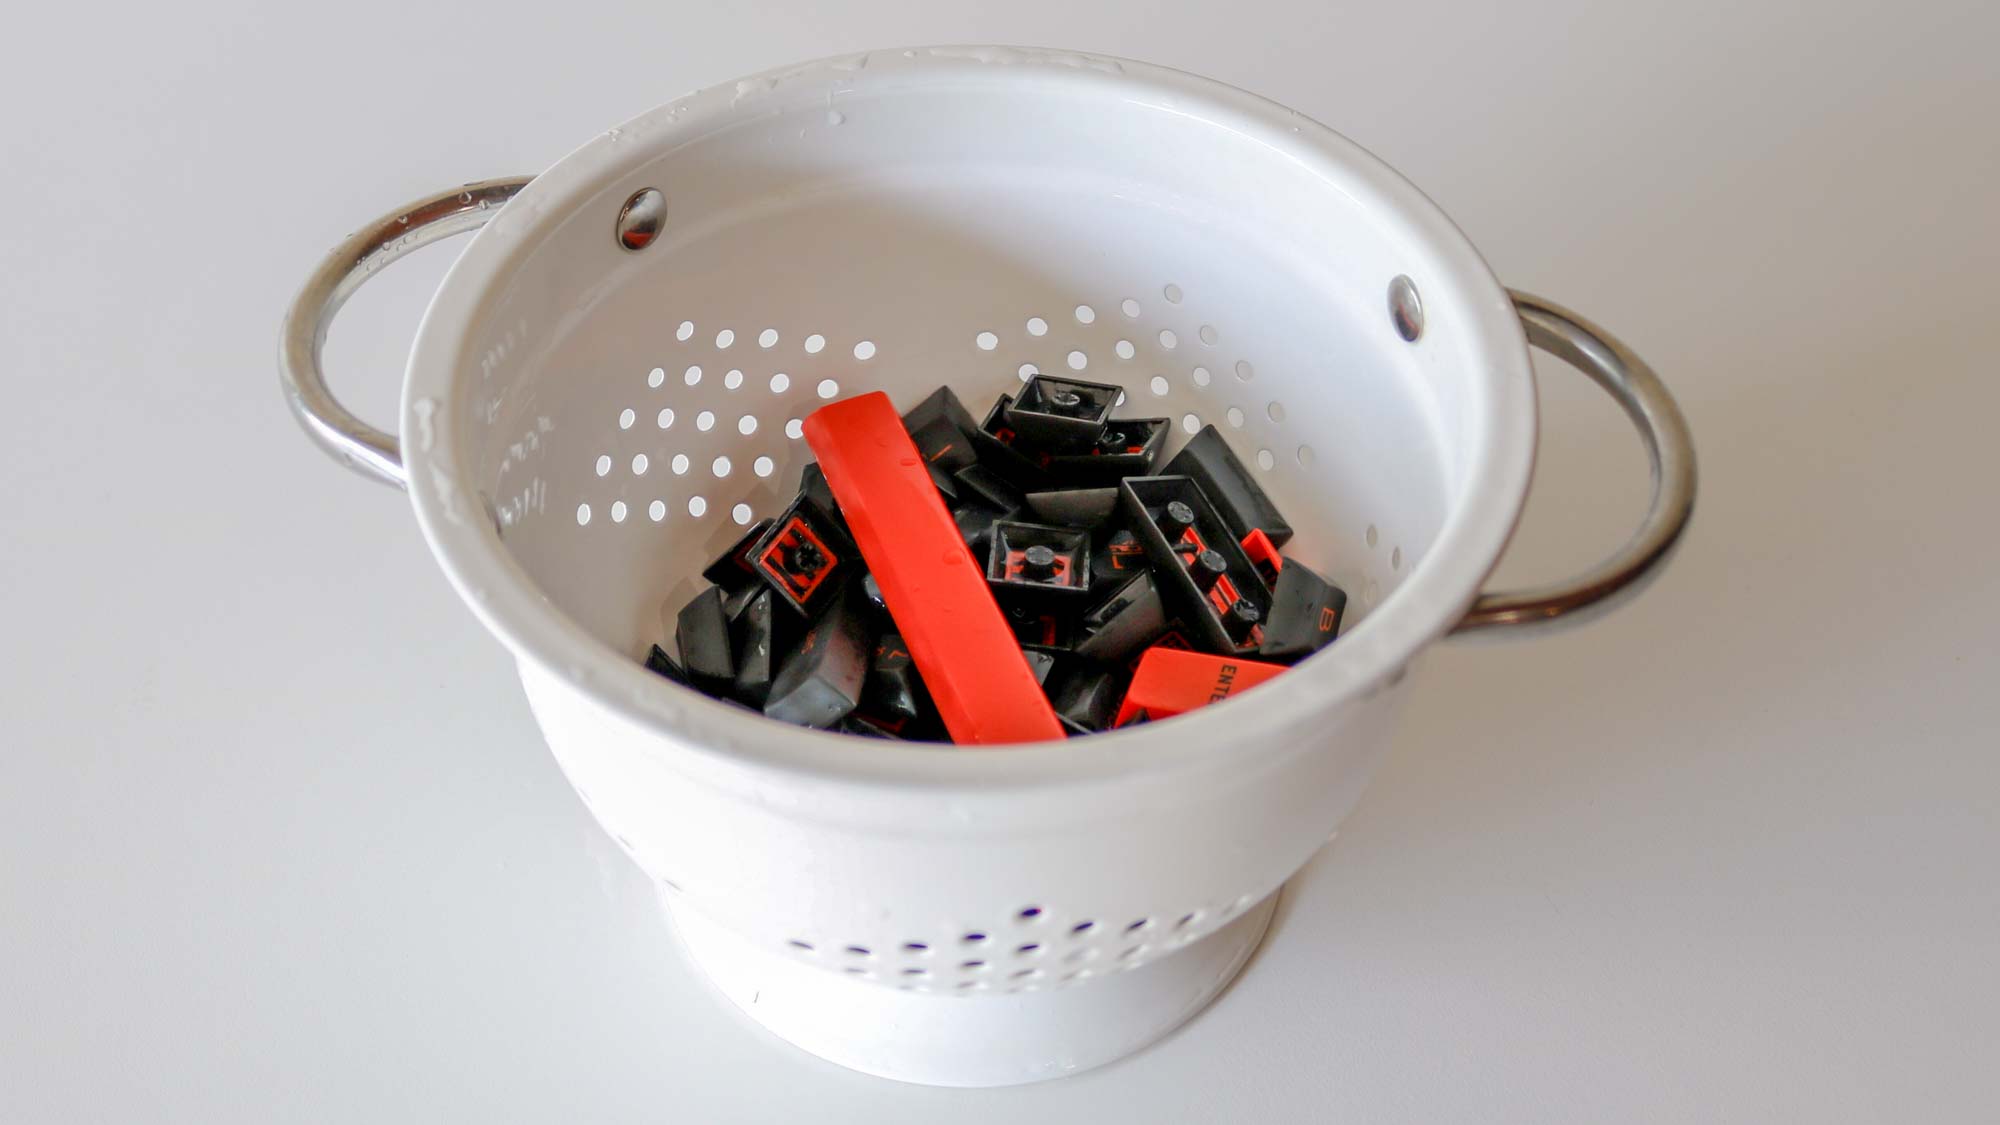 Drying keycaps in a strainer